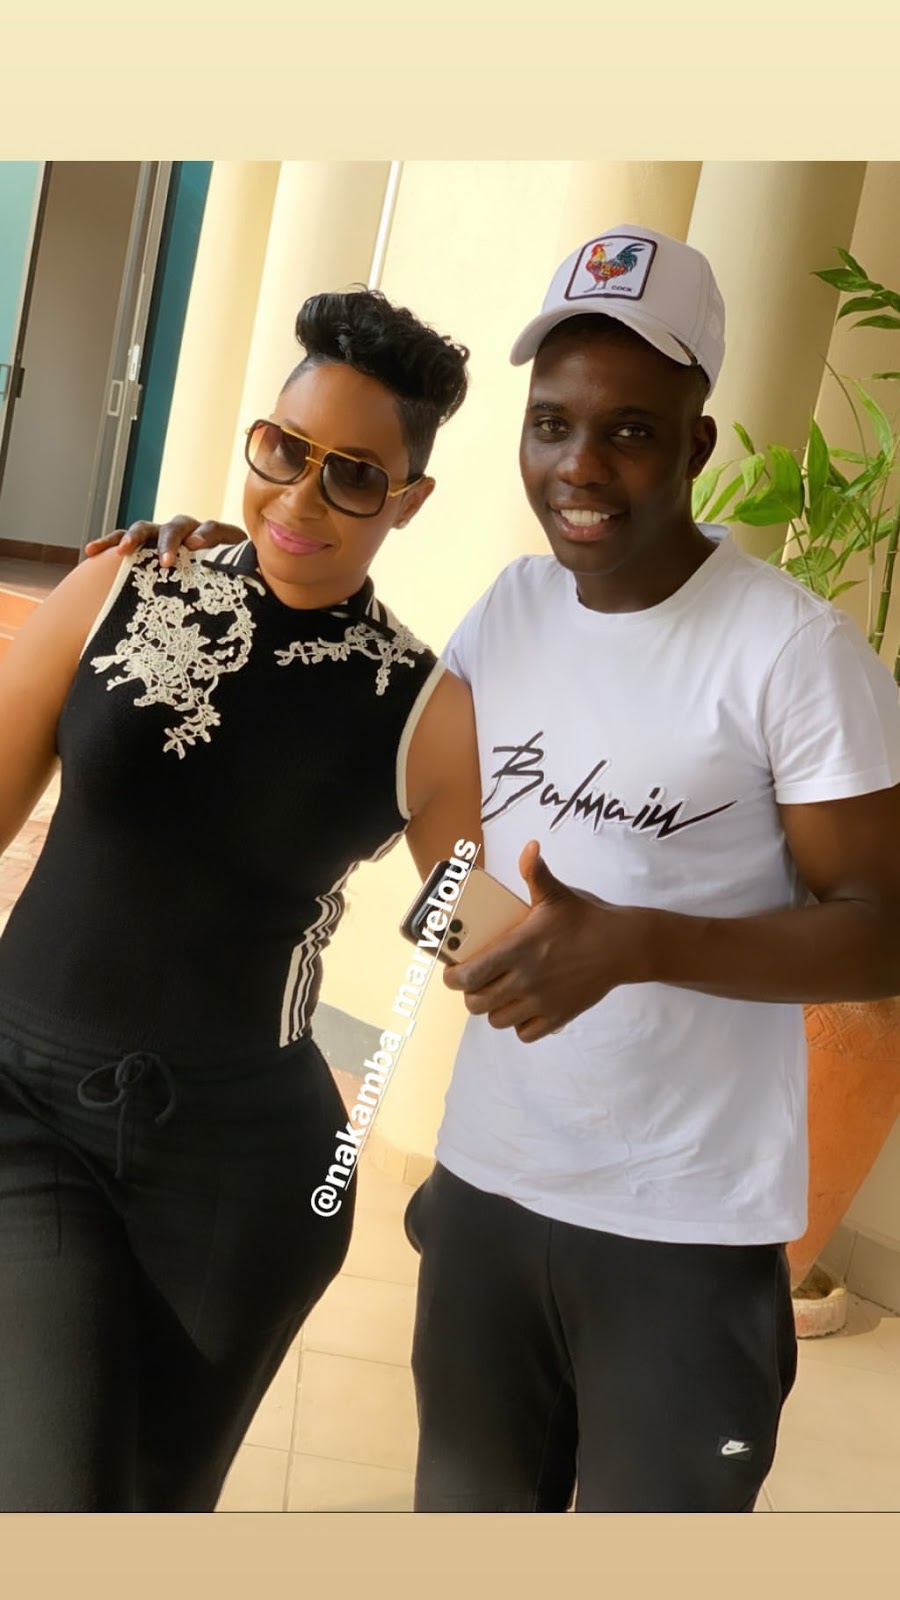 Pokello thrills the Warriors with a 'surprise' visit 